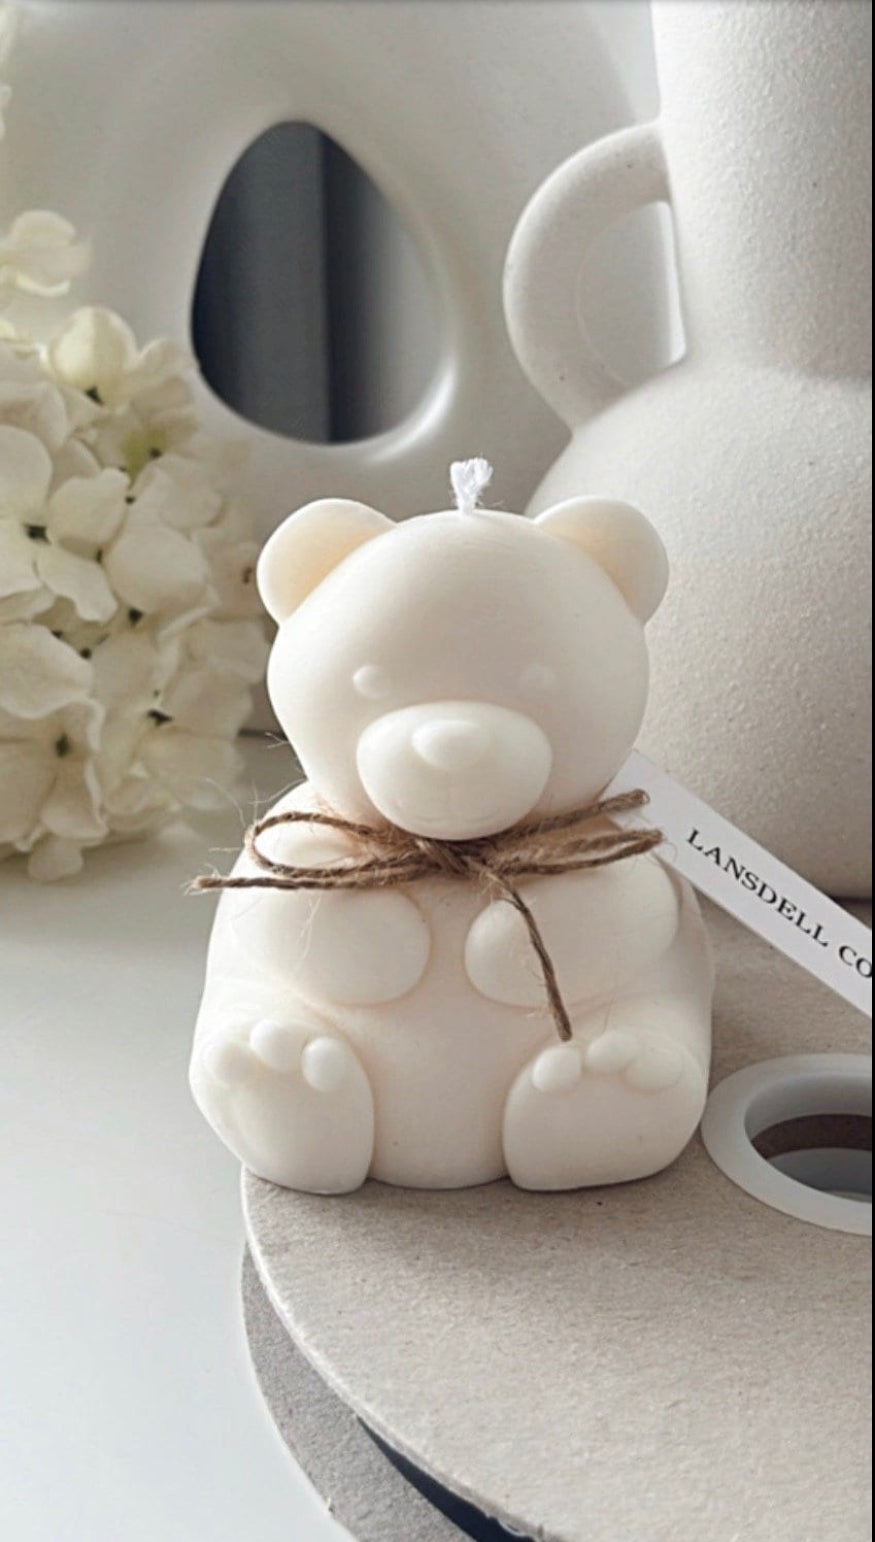 The Teddy Bear Candle – Lansdell Co.